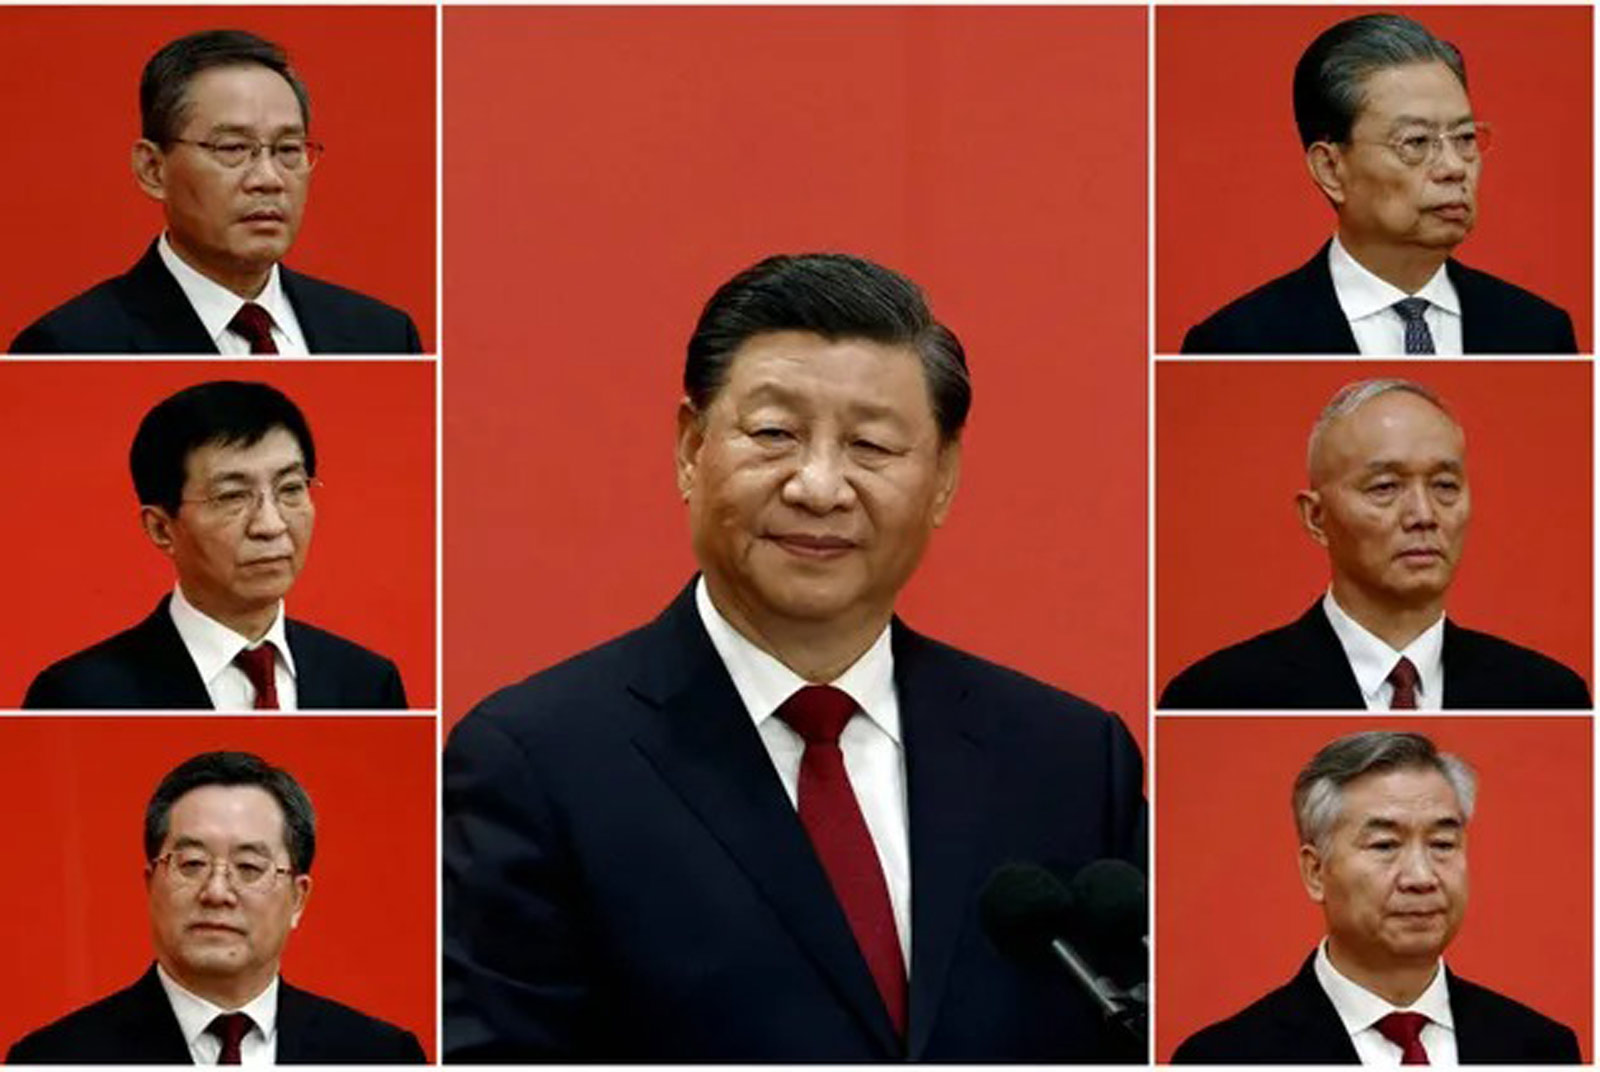 What does Xi’s new army mean for China’s future?